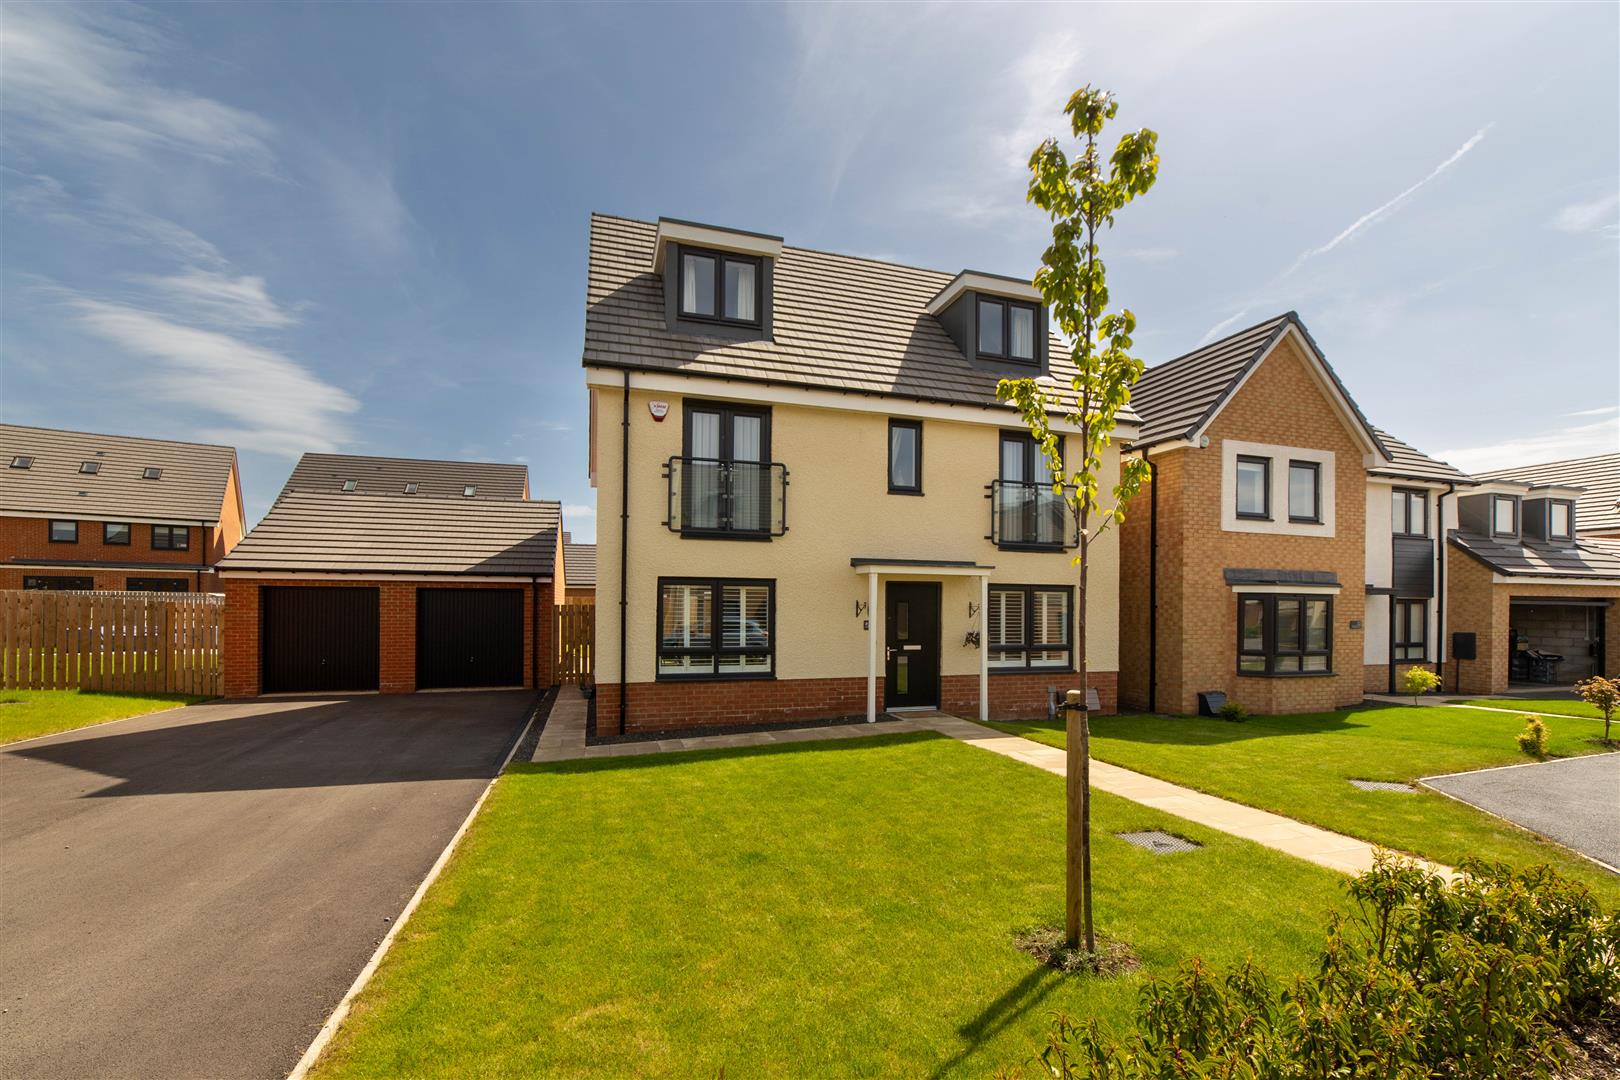 5 bed detached house for sale in Gatekeeper Close, Great Park, NE13